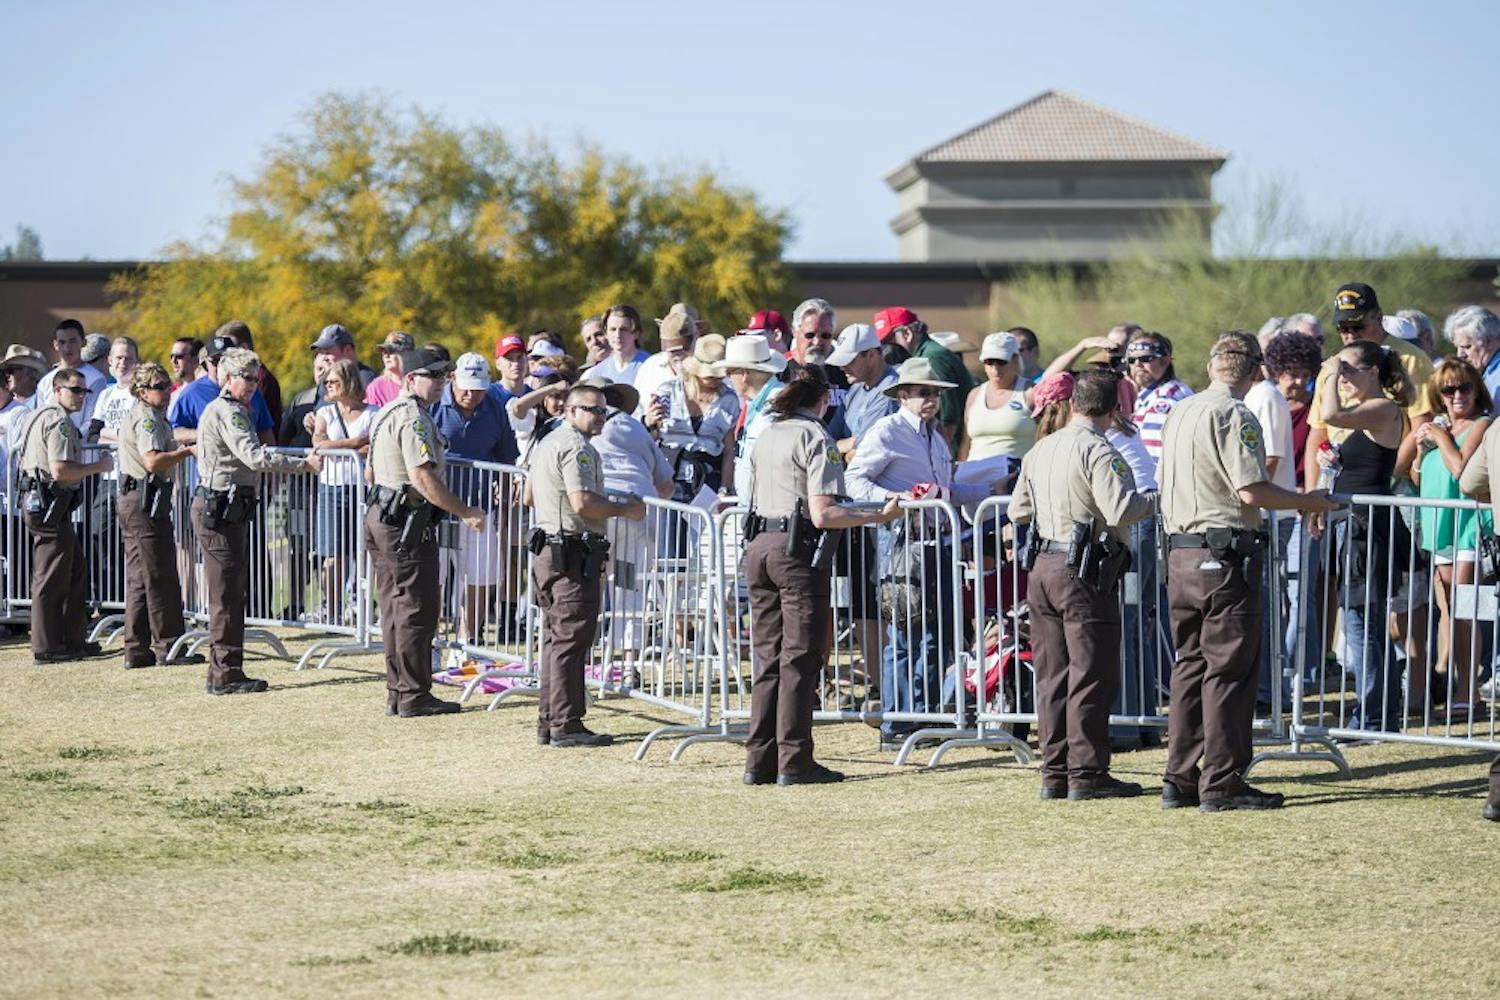 Security personnel patrol a rally for presidential candidate Donald Trump at Fountain Park in Fountain Hills, Arizona, on Saturday, March 19, 2016. 